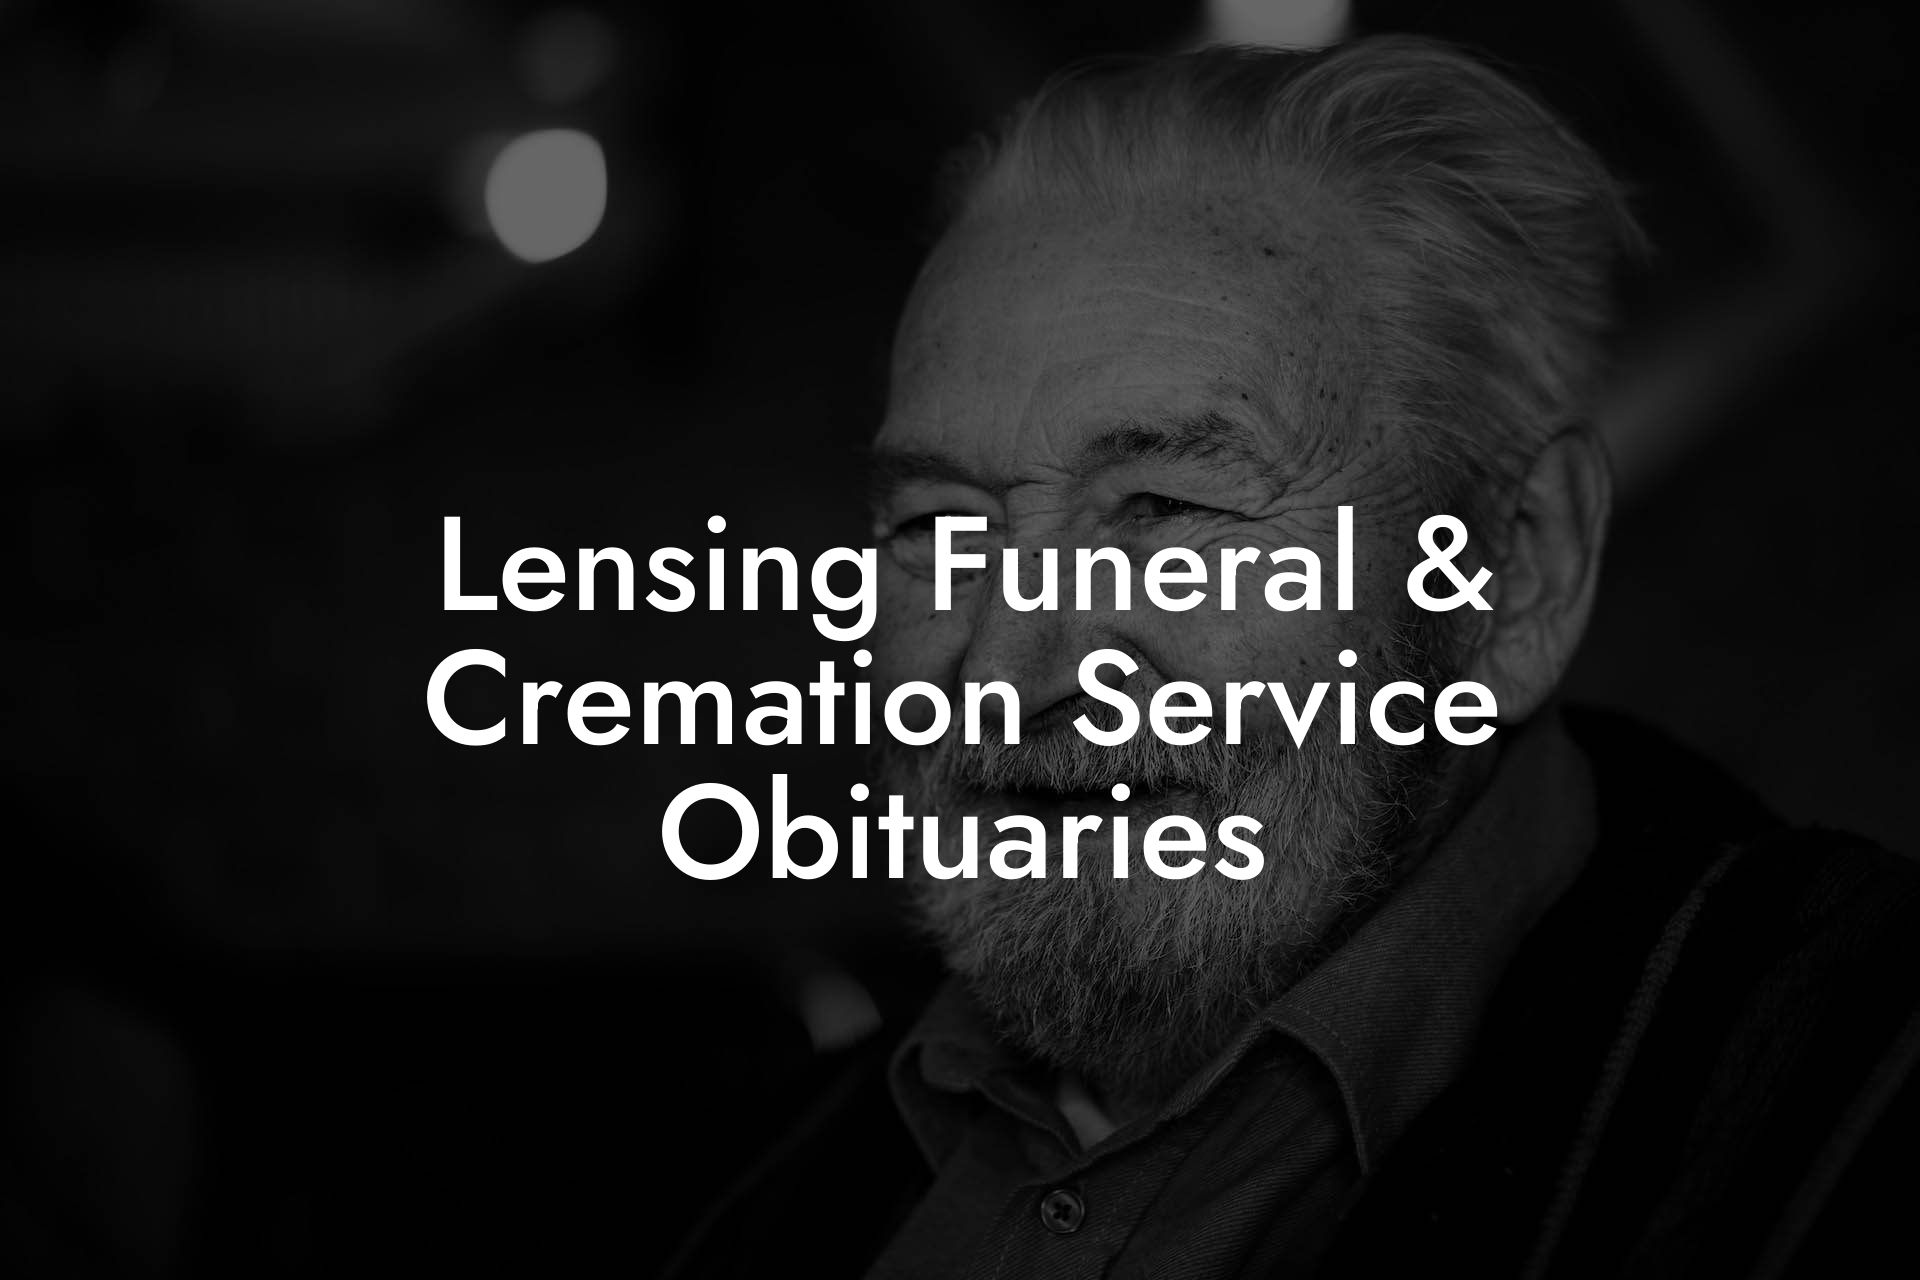 Lensing Funeral & Cremation Service Obituaries